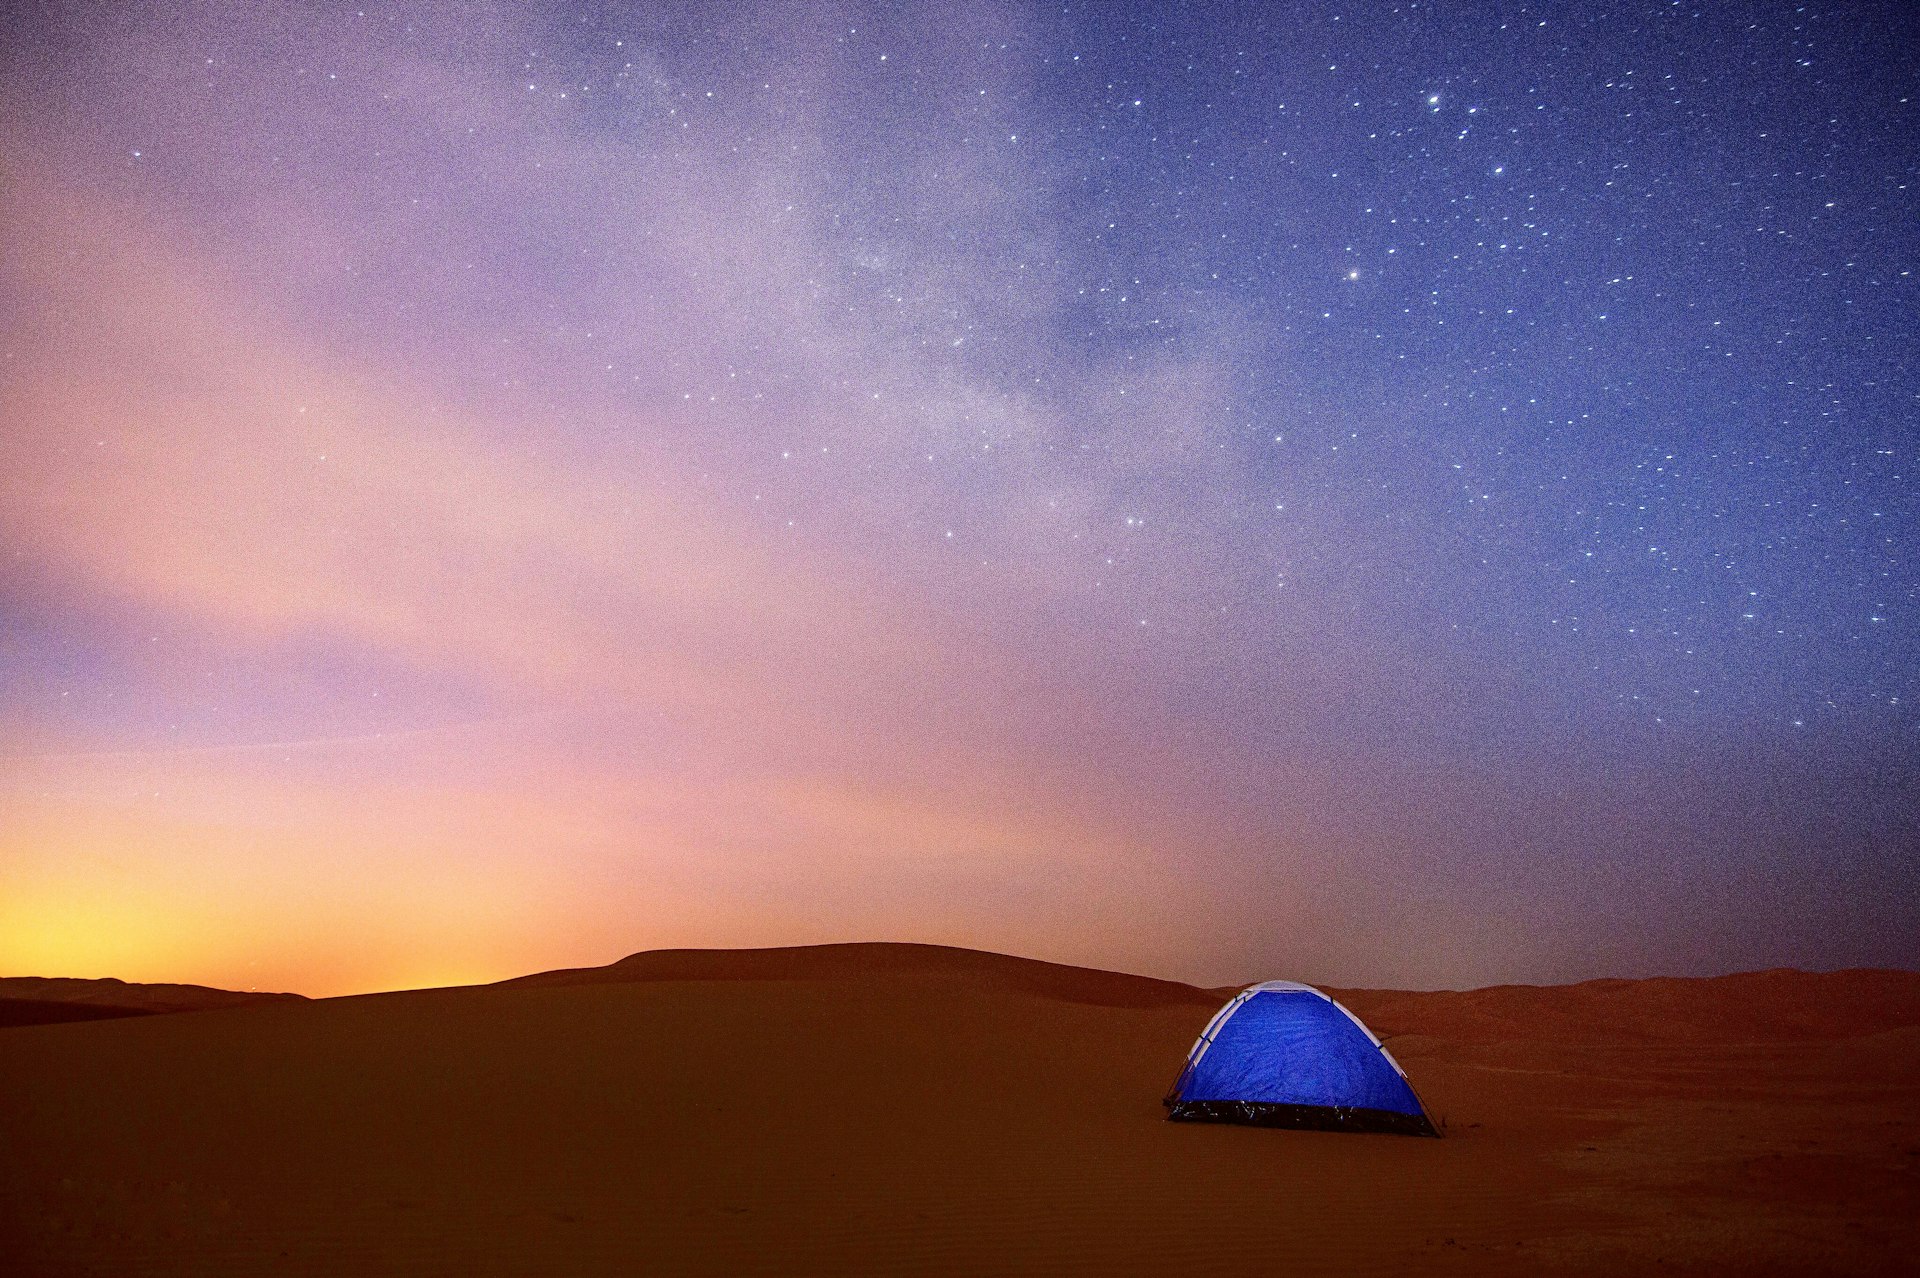 Tent in the desert during sunset in Abu Dhabi with stars in the sky